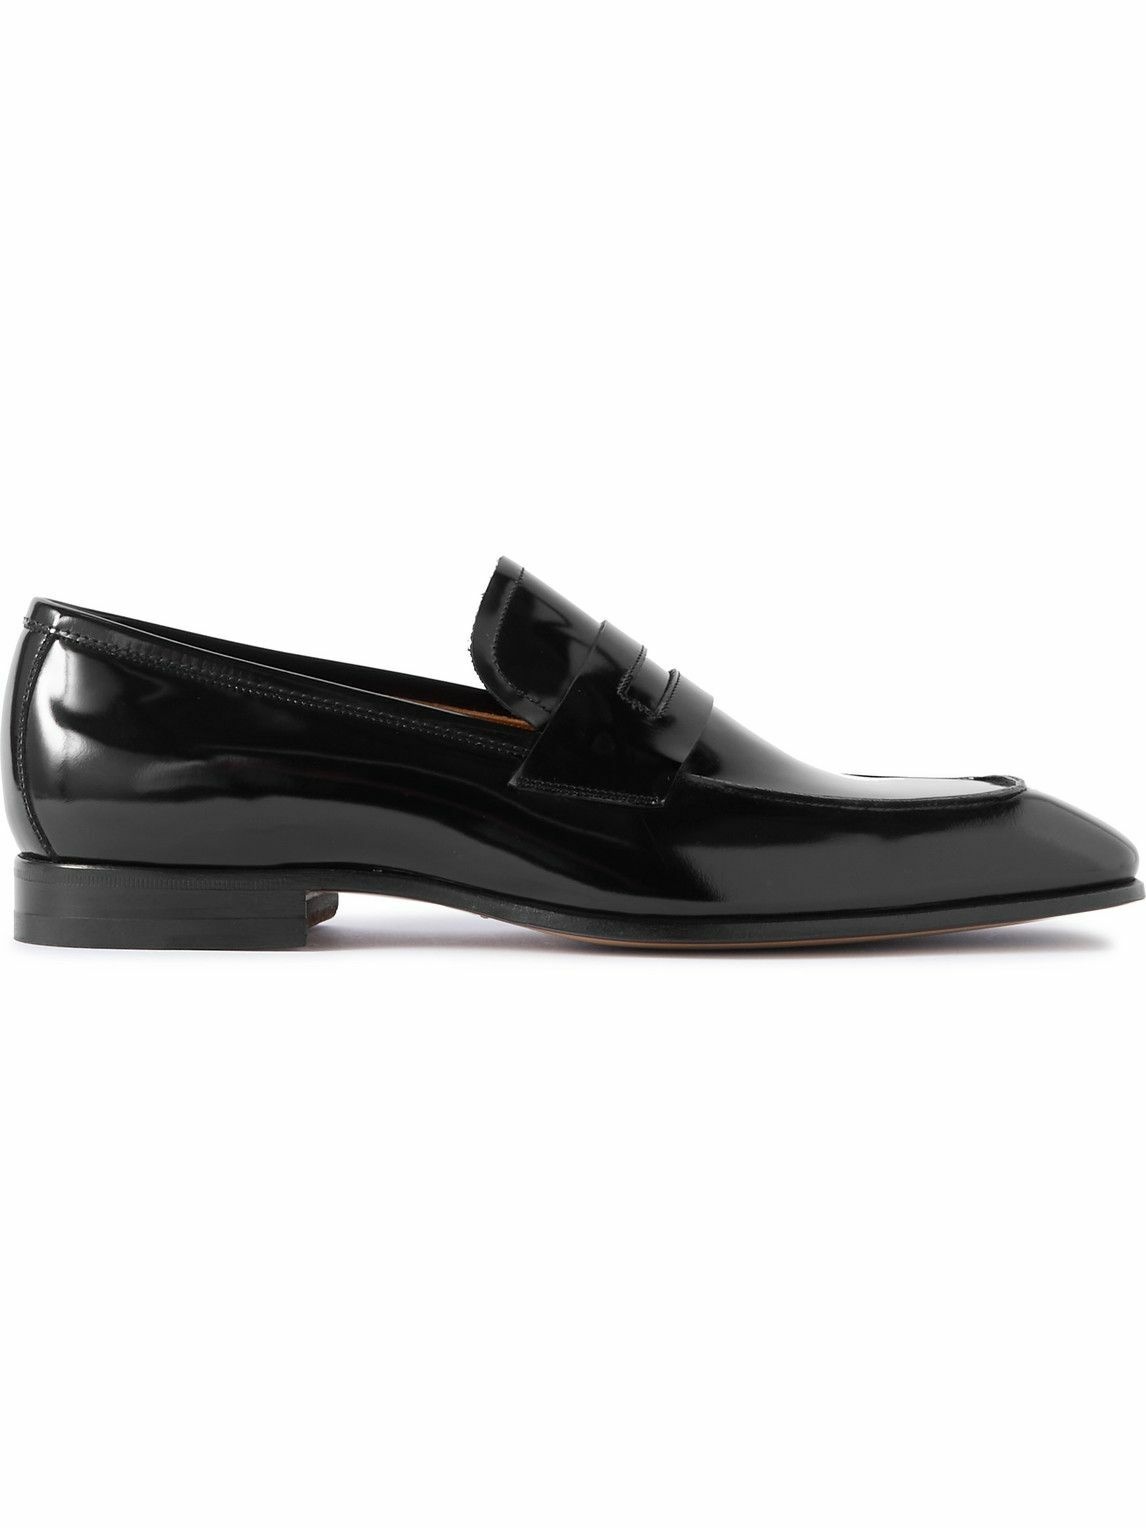 TOM FORD - Bailey Patent-Leather Penny Loafers - Black TOM FORD